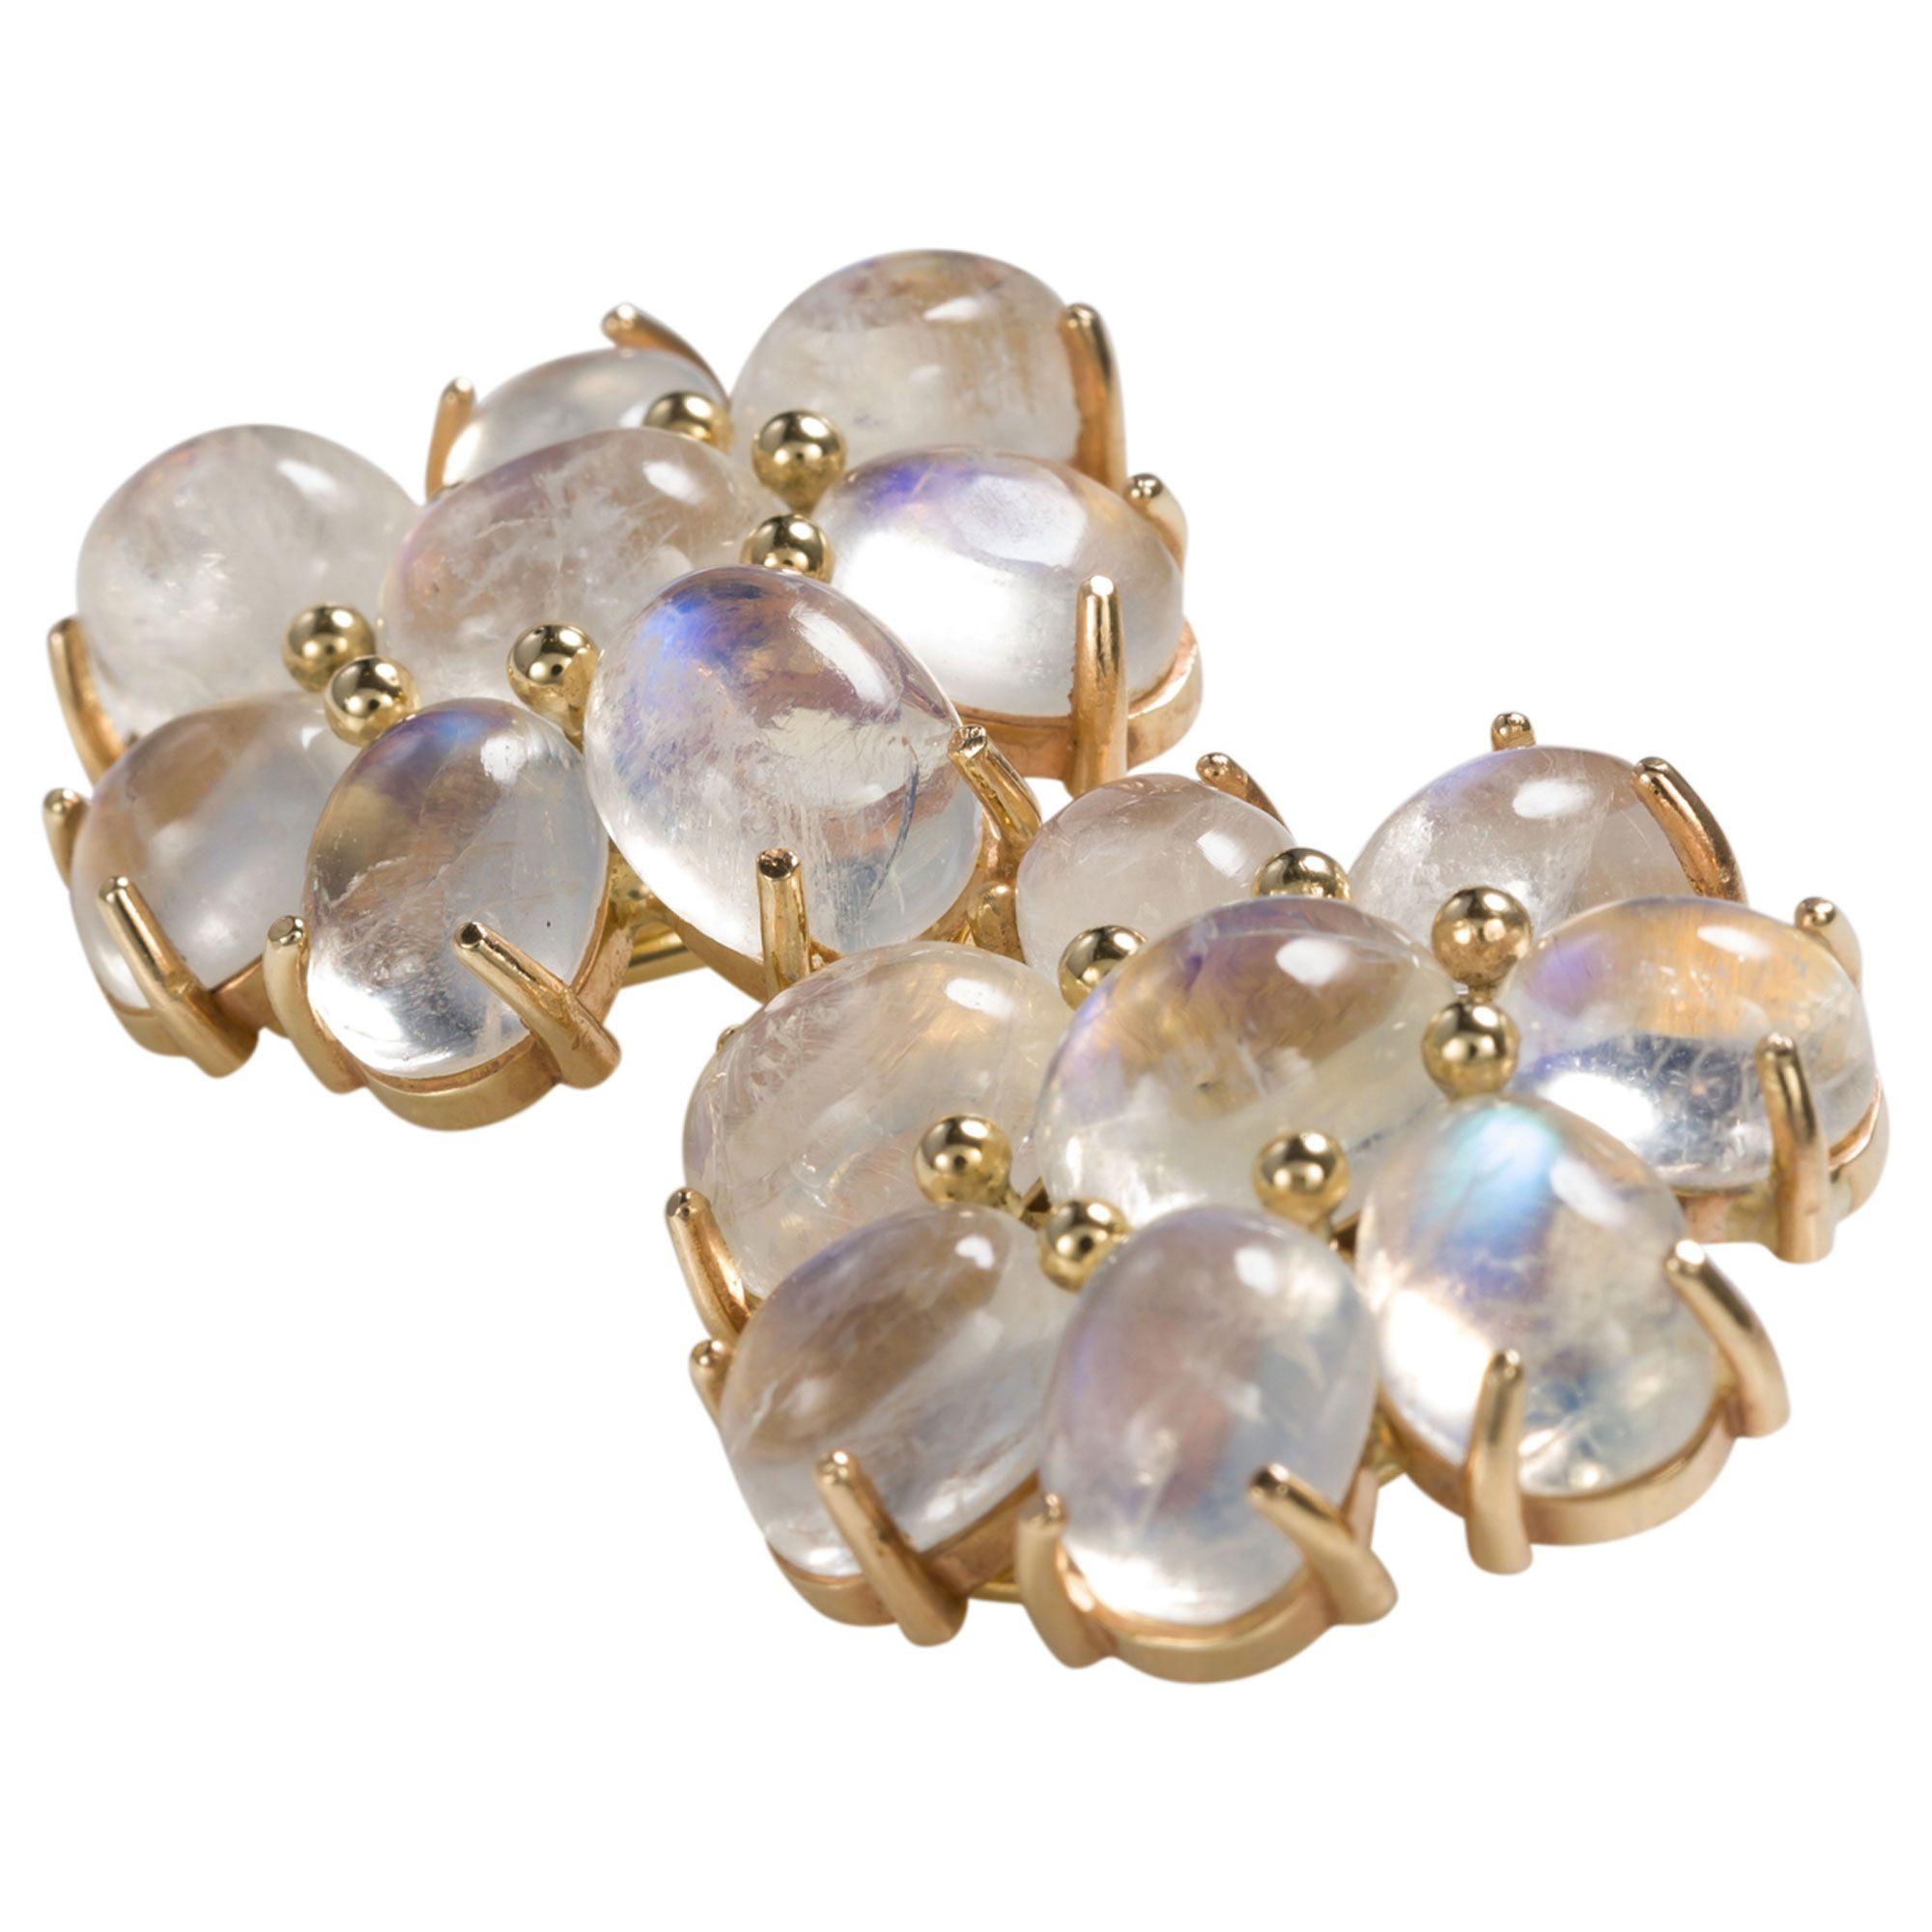 Moonstones are the most magical gemstone. Featuring a gemmological phenomenon called Adularescence which is when a blue schiller moves across the gemstone. In different light directions this can be seen and it is quite hypnotic. These earrings